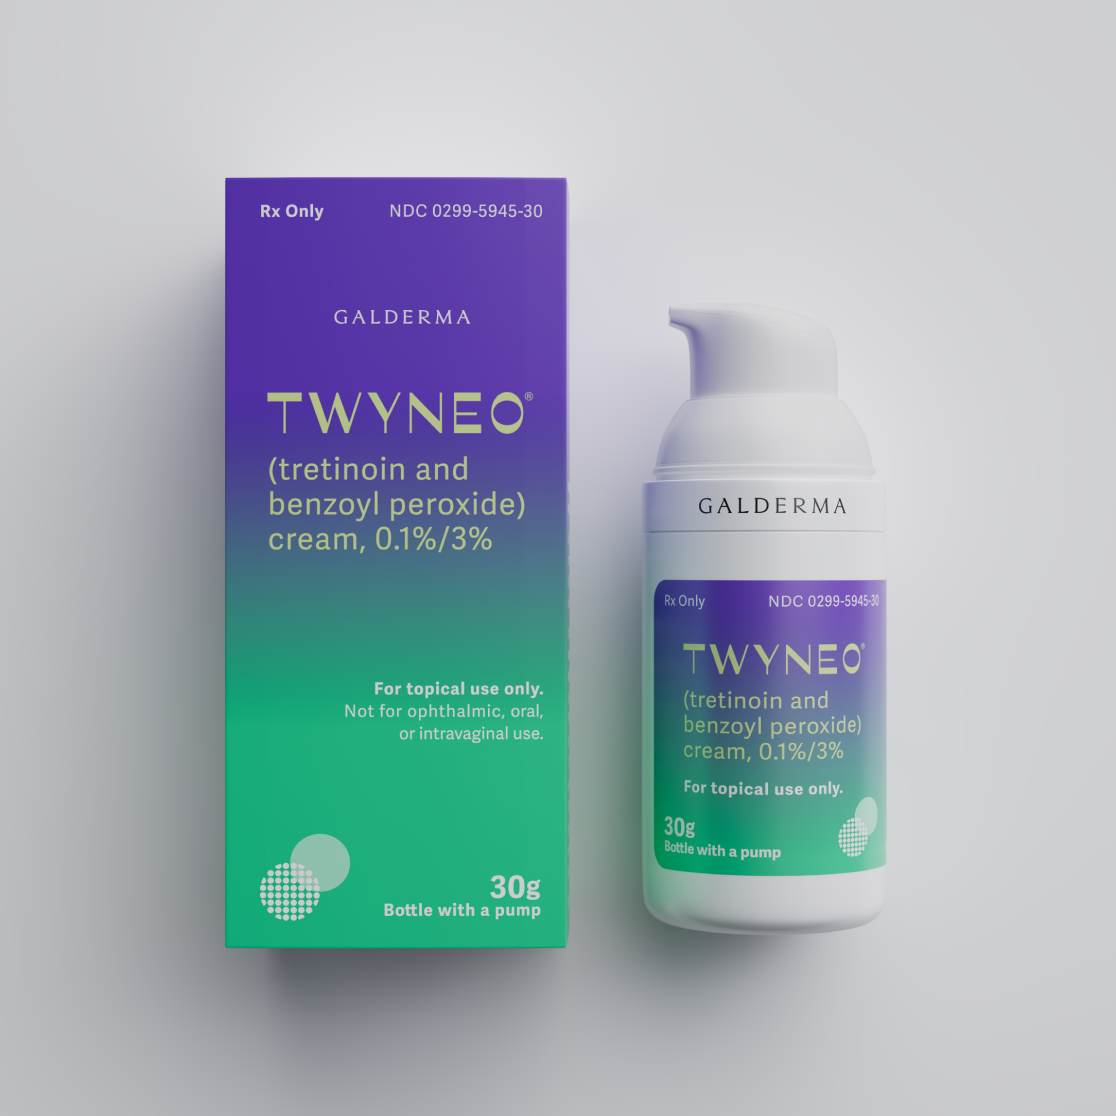 Image of the TWYNEO cream box and bottle beside it.